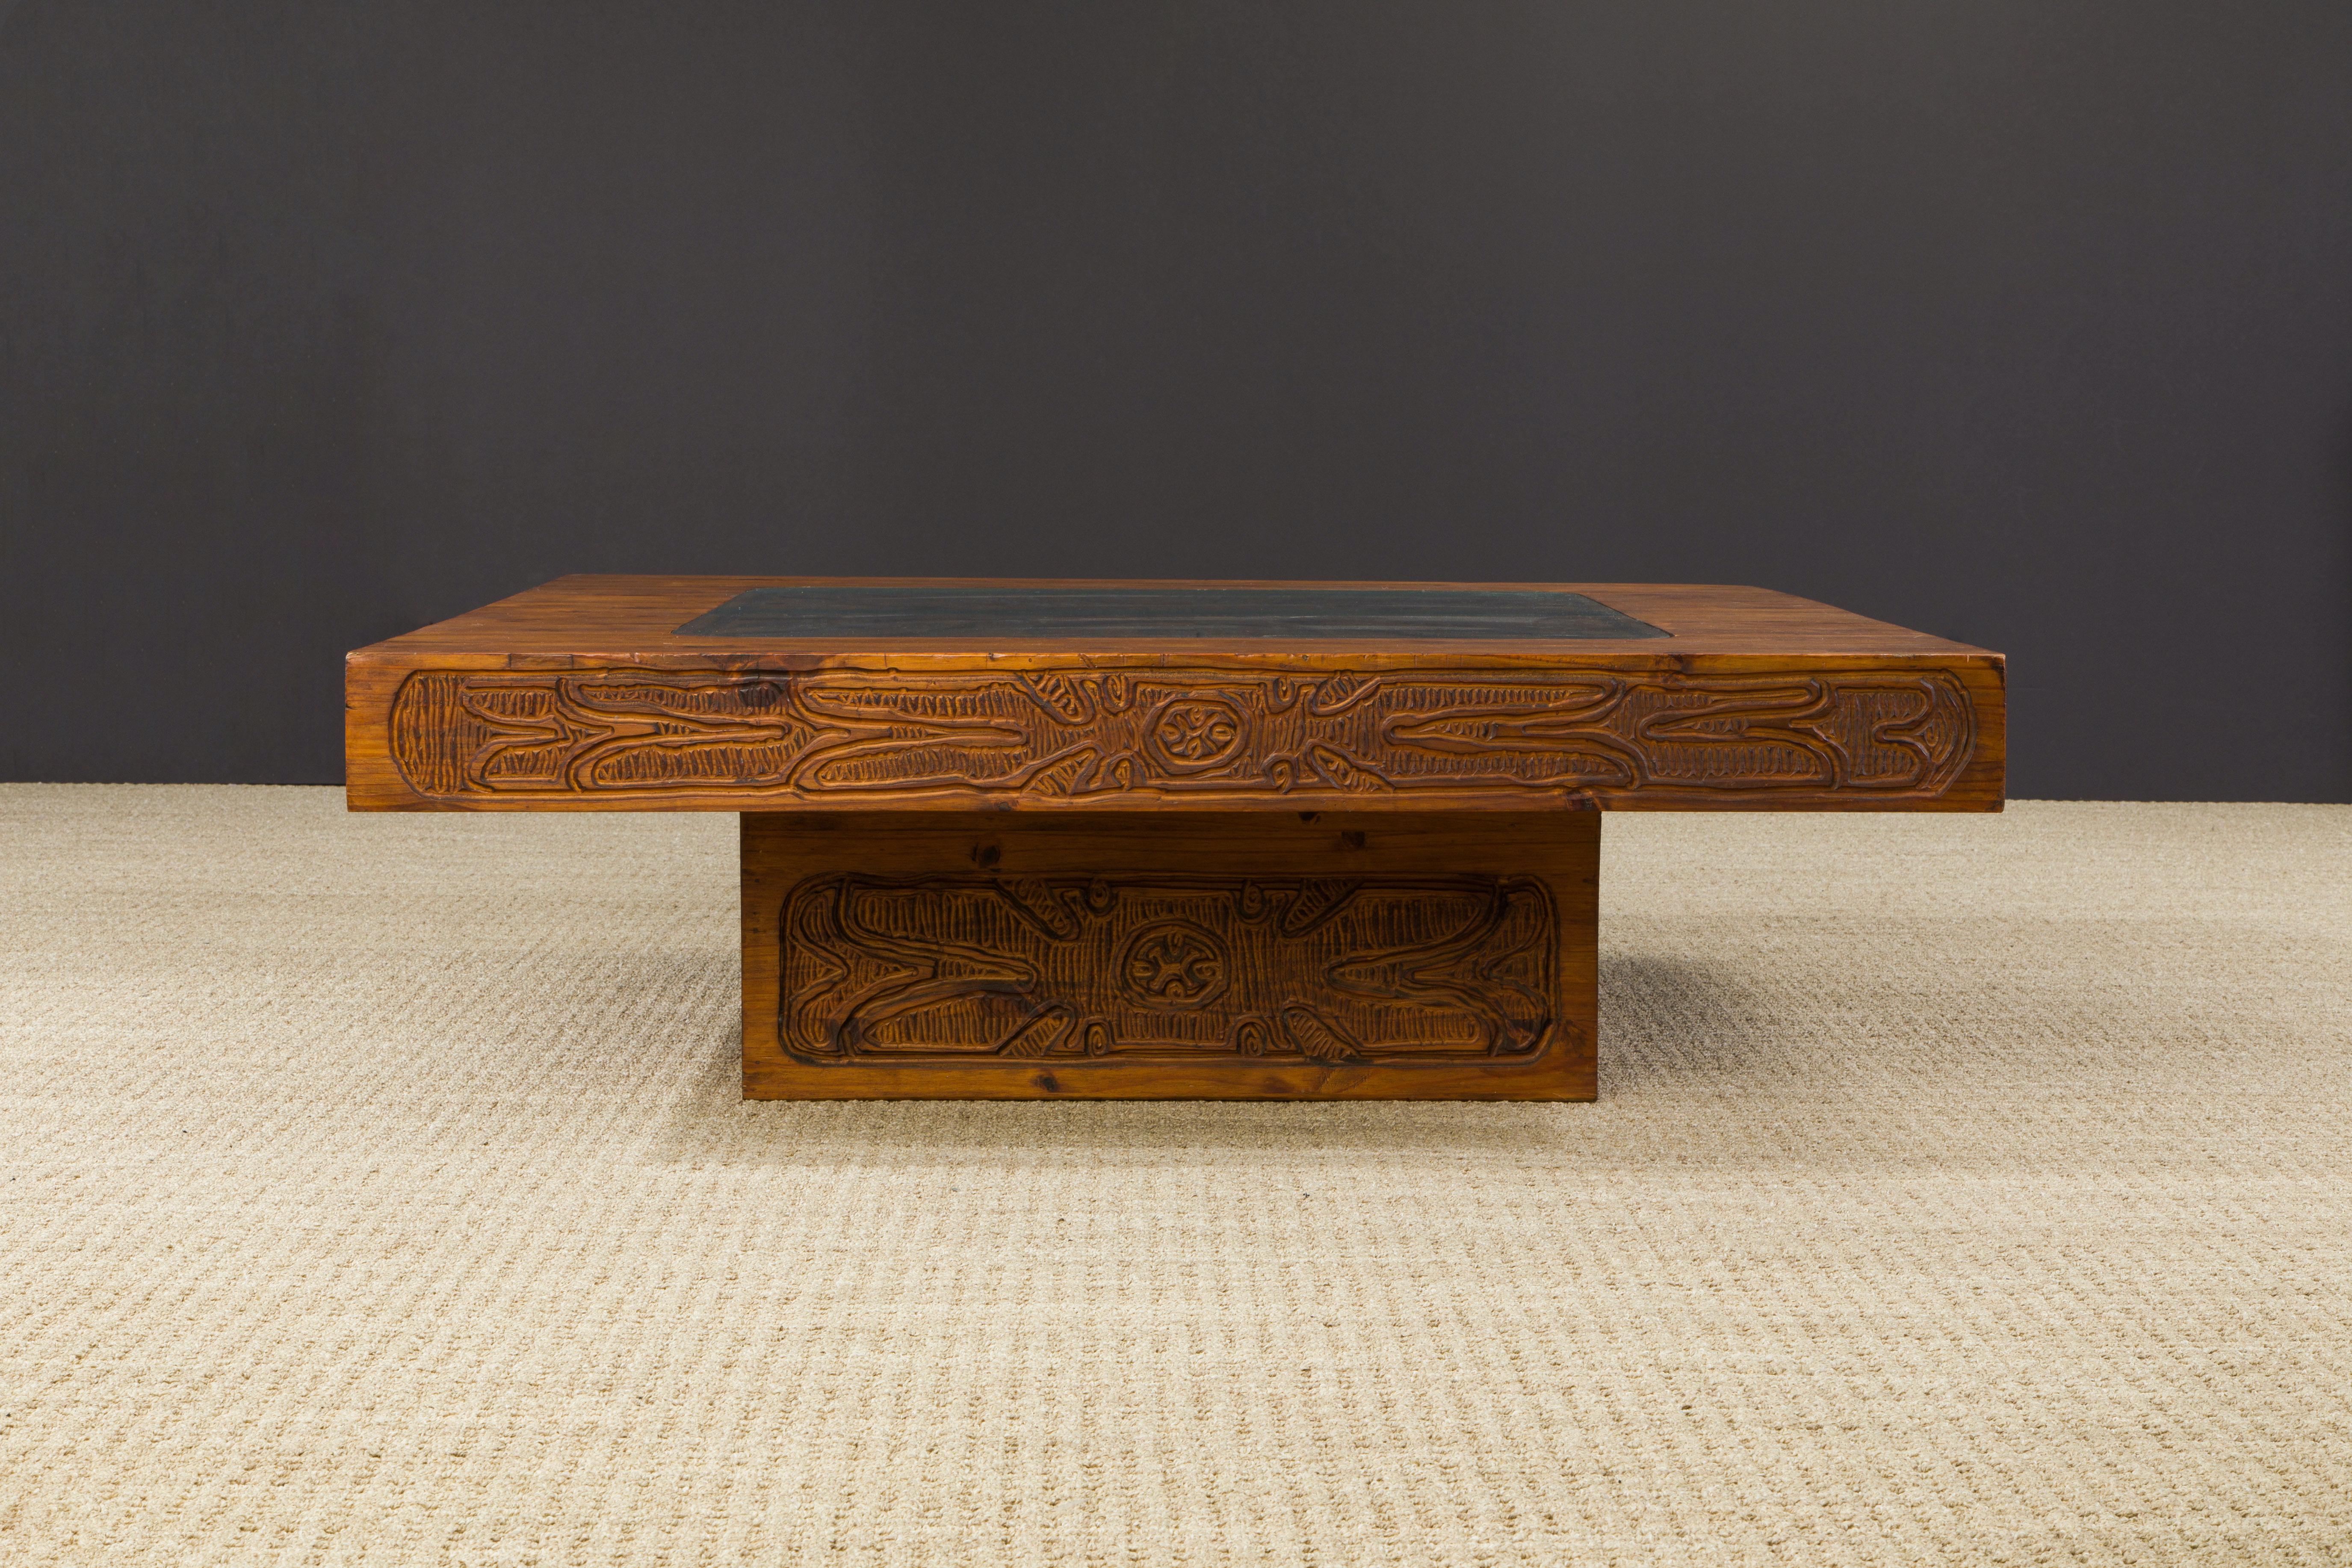 This incredible Mexican modern carved wood coffee table, attributed to Evelyn Ackerman is from circa 1970s, featuring a hefty 53+